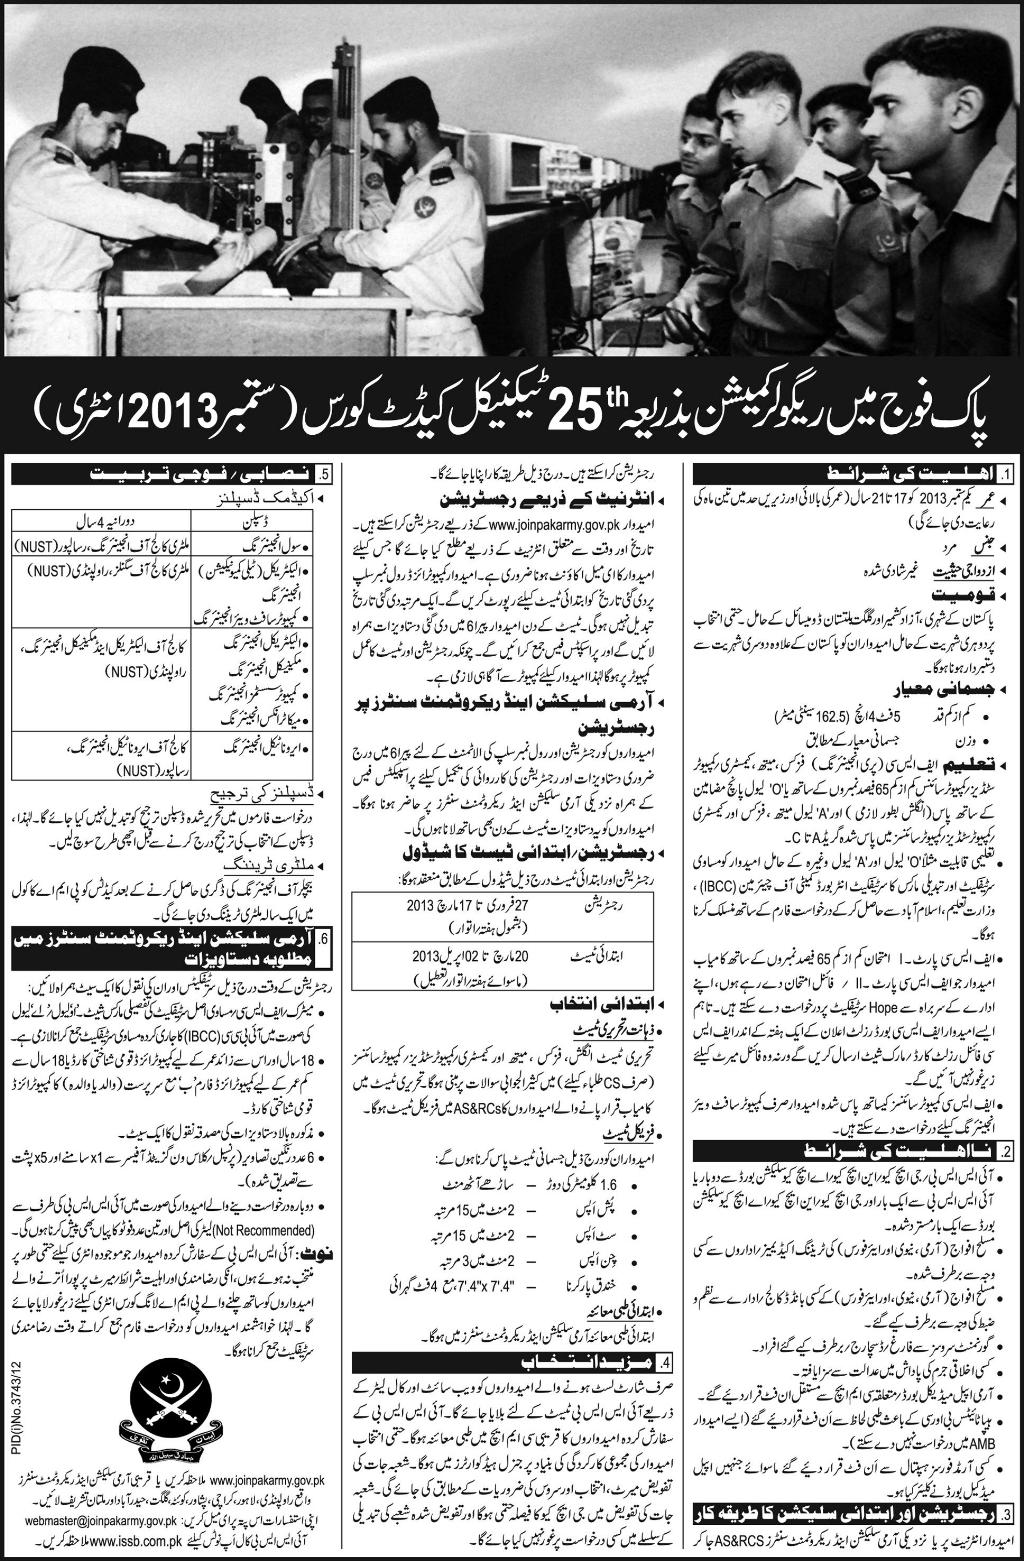 Join Pakistan Army Technical Cadet Course 2013 Regular Commission